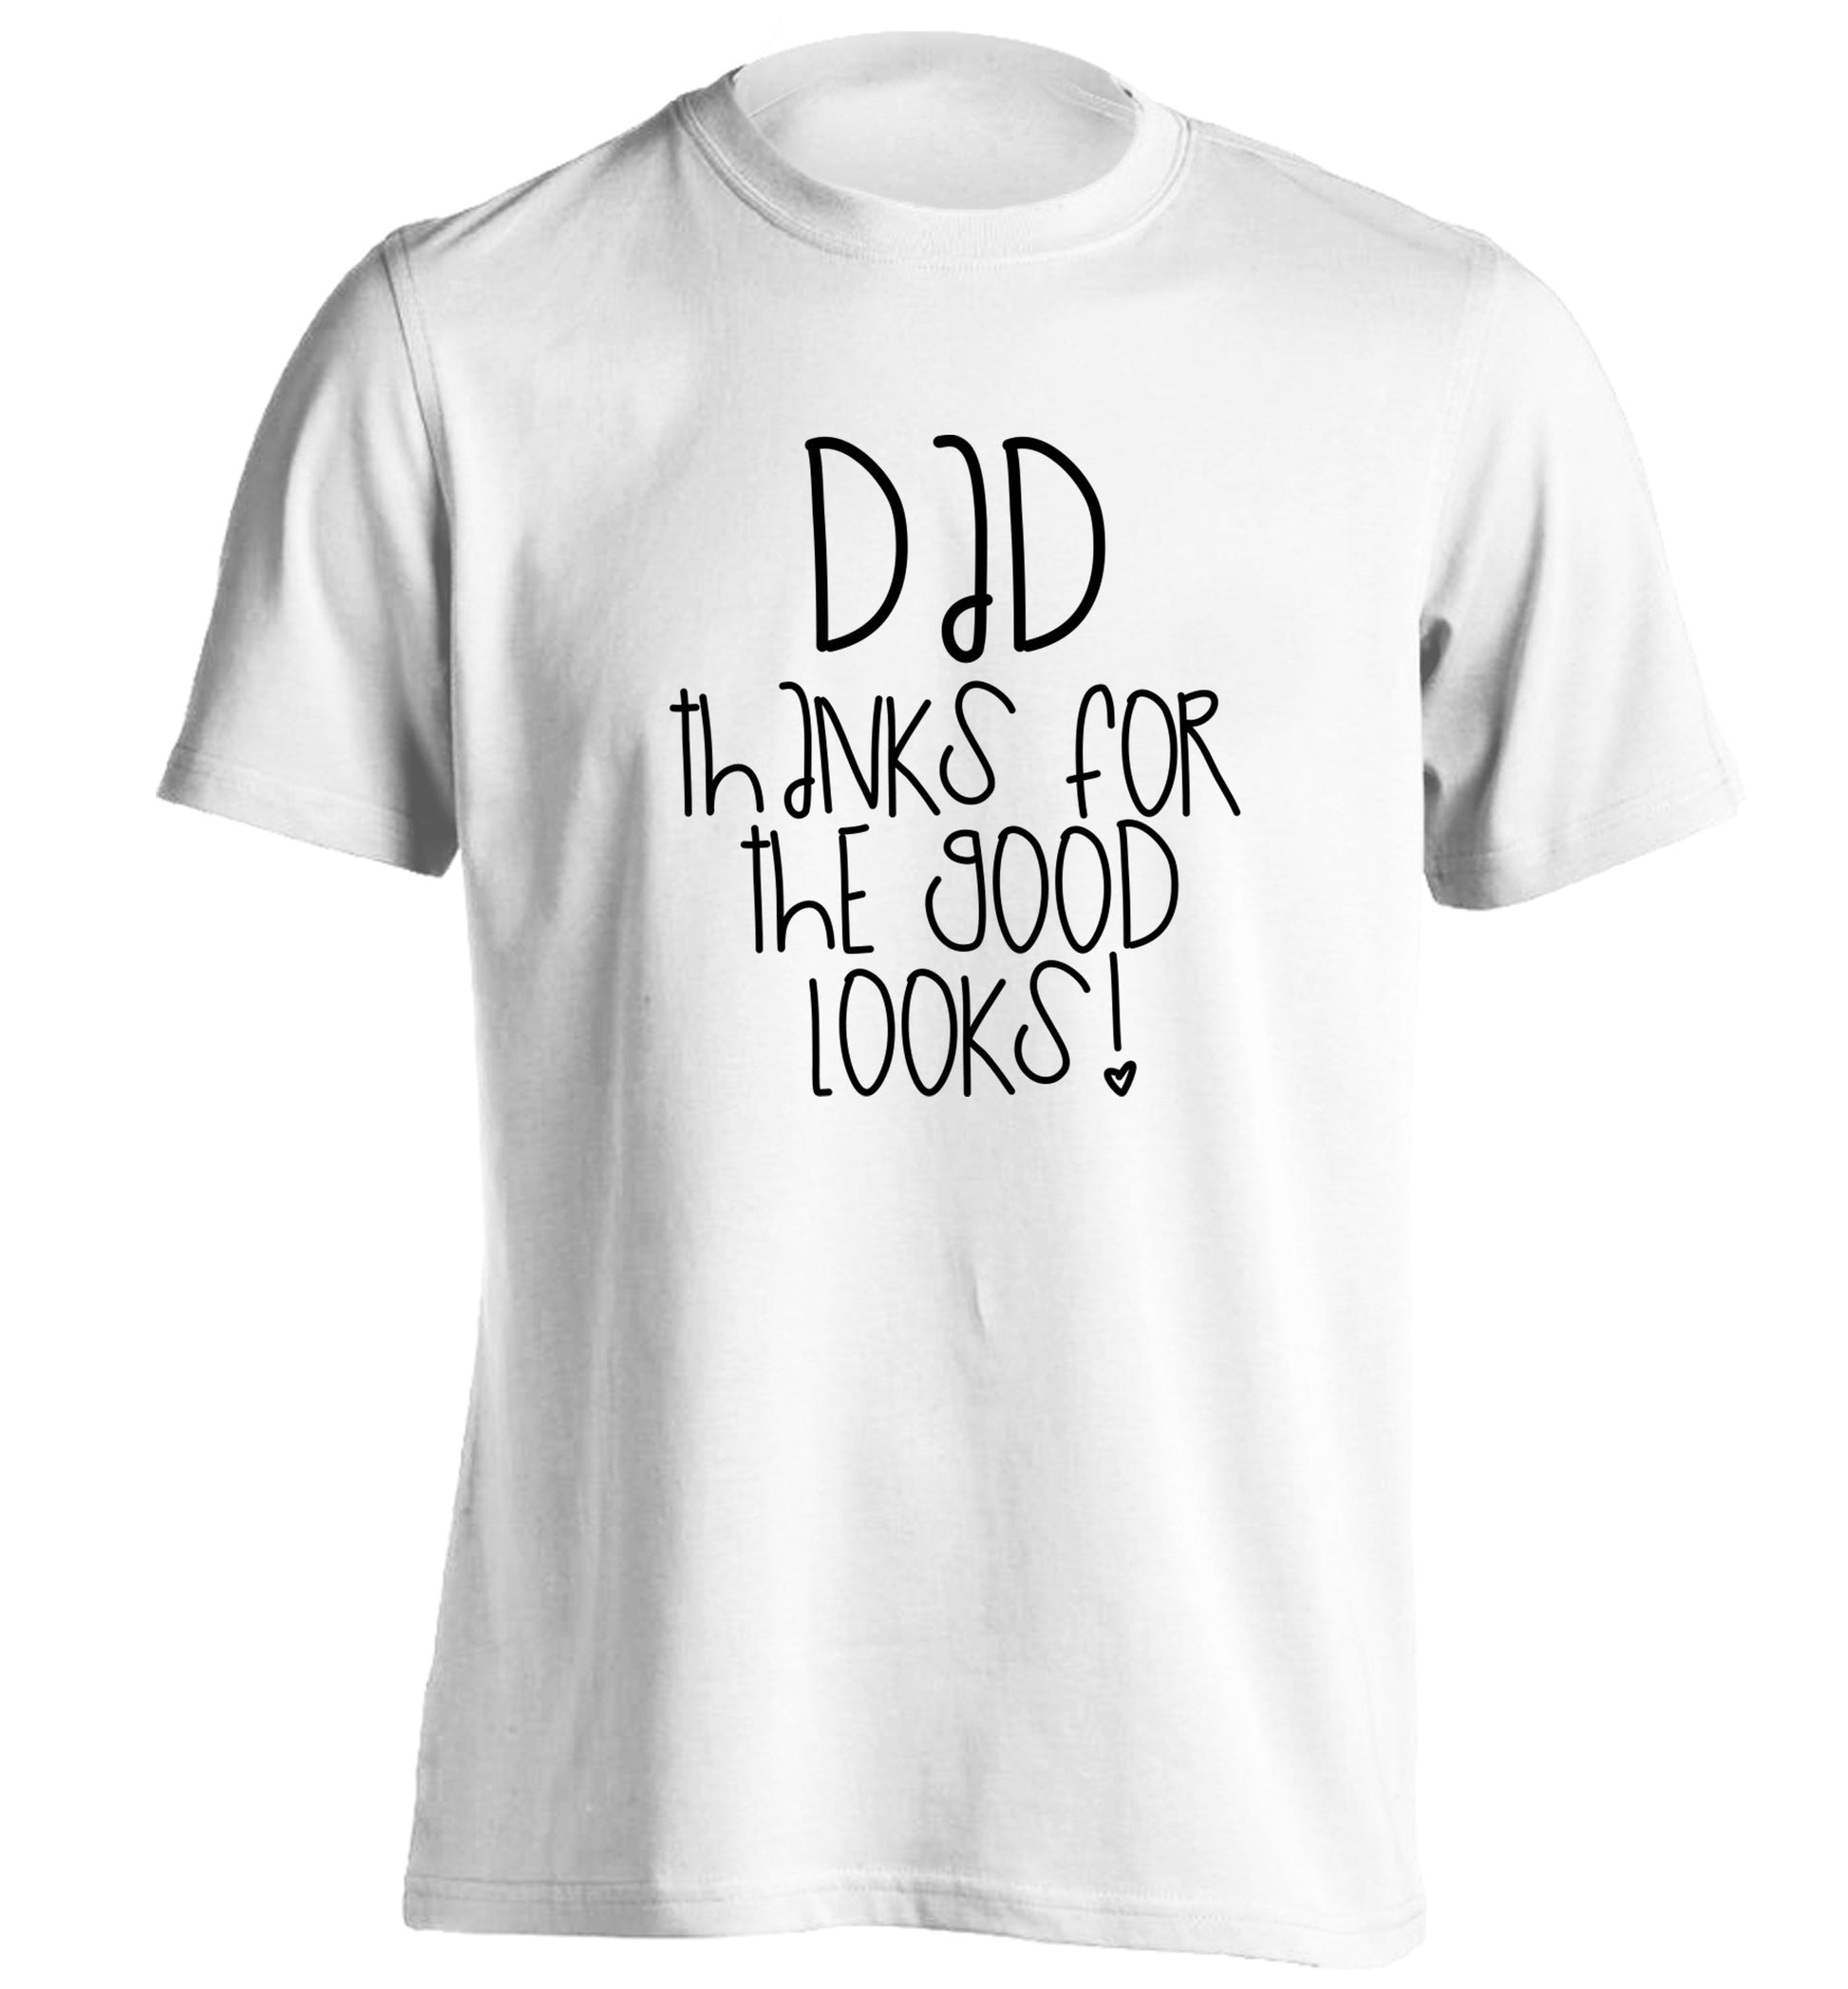 Dad thanks for the good looks adults unisex white Tshirt 2XL